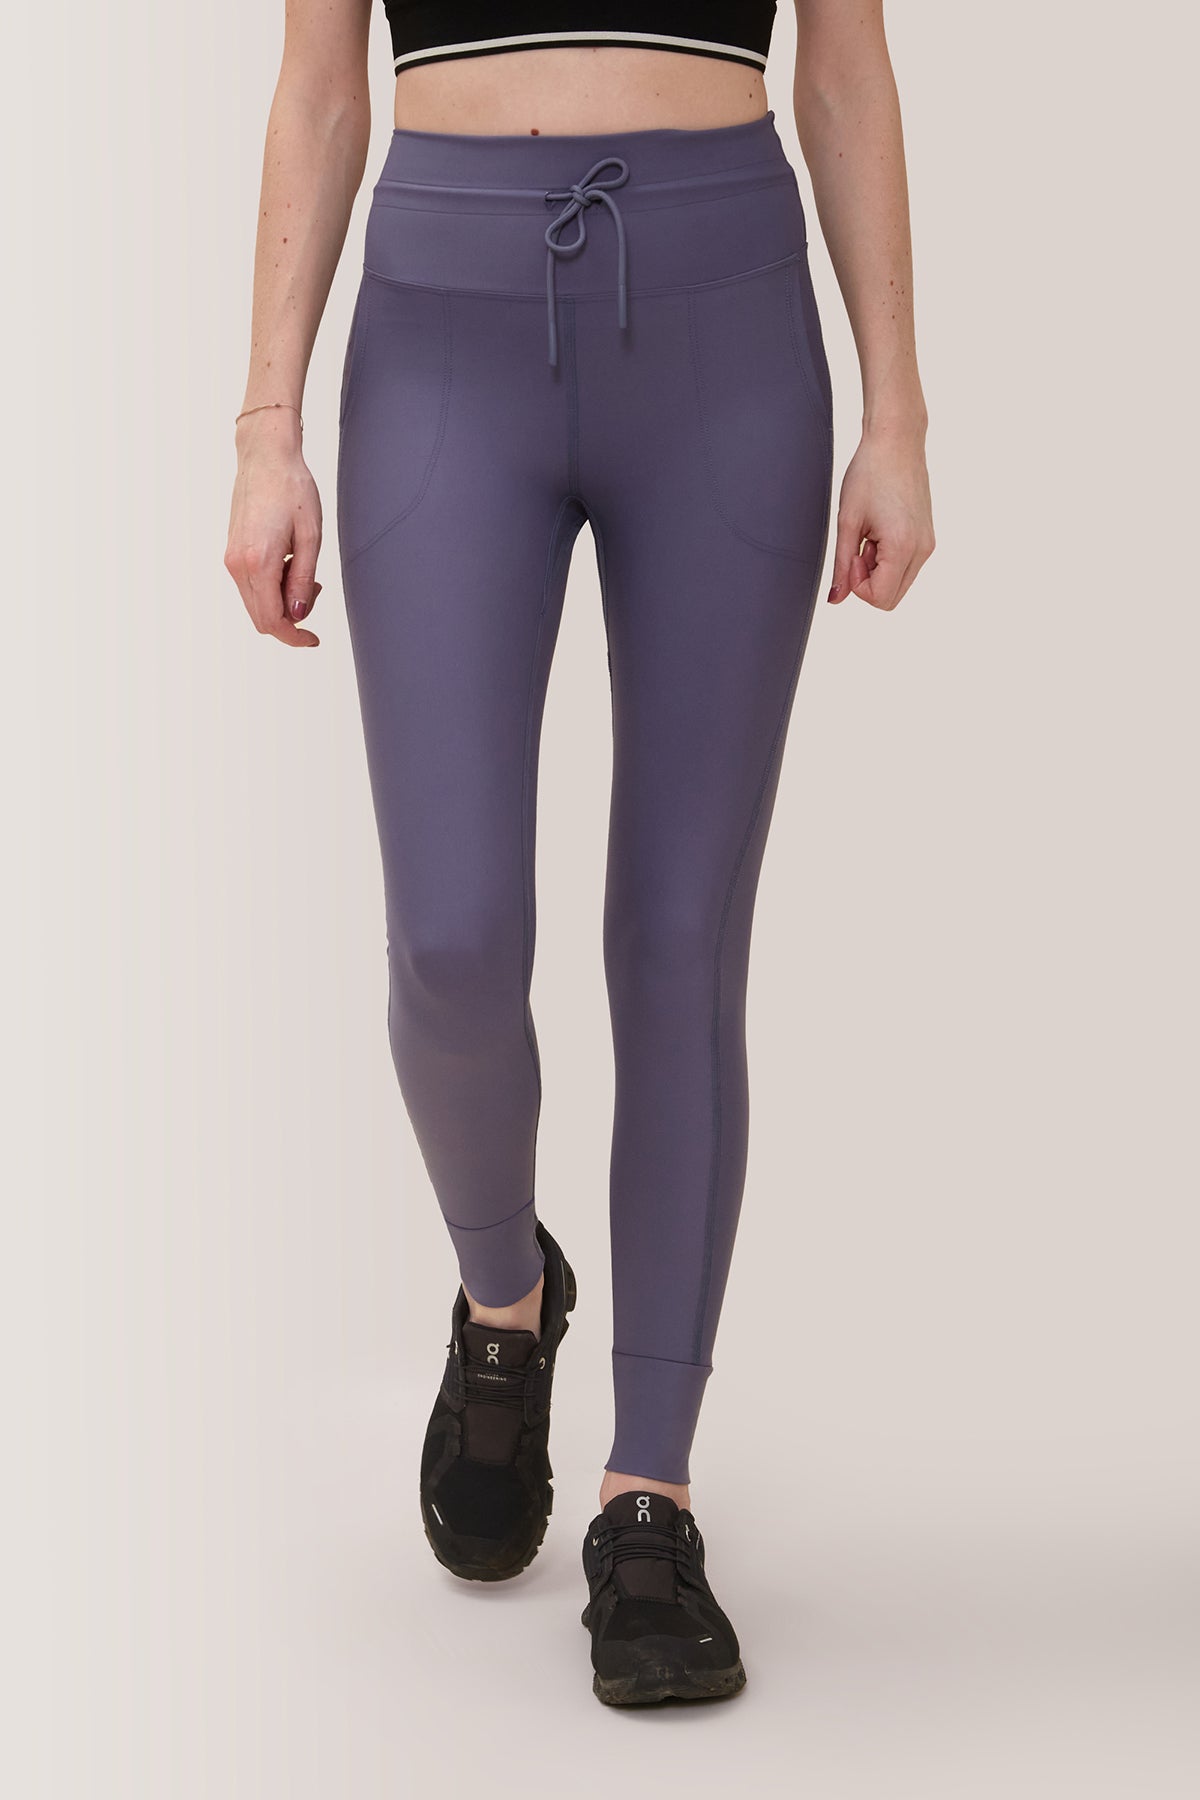 Femme qui porte le legging avec pochettes Stay Flex de Rose Boreal./ Women wearing the Stay Flex Legging with Pockets from Rose Boreal. - Grisaille